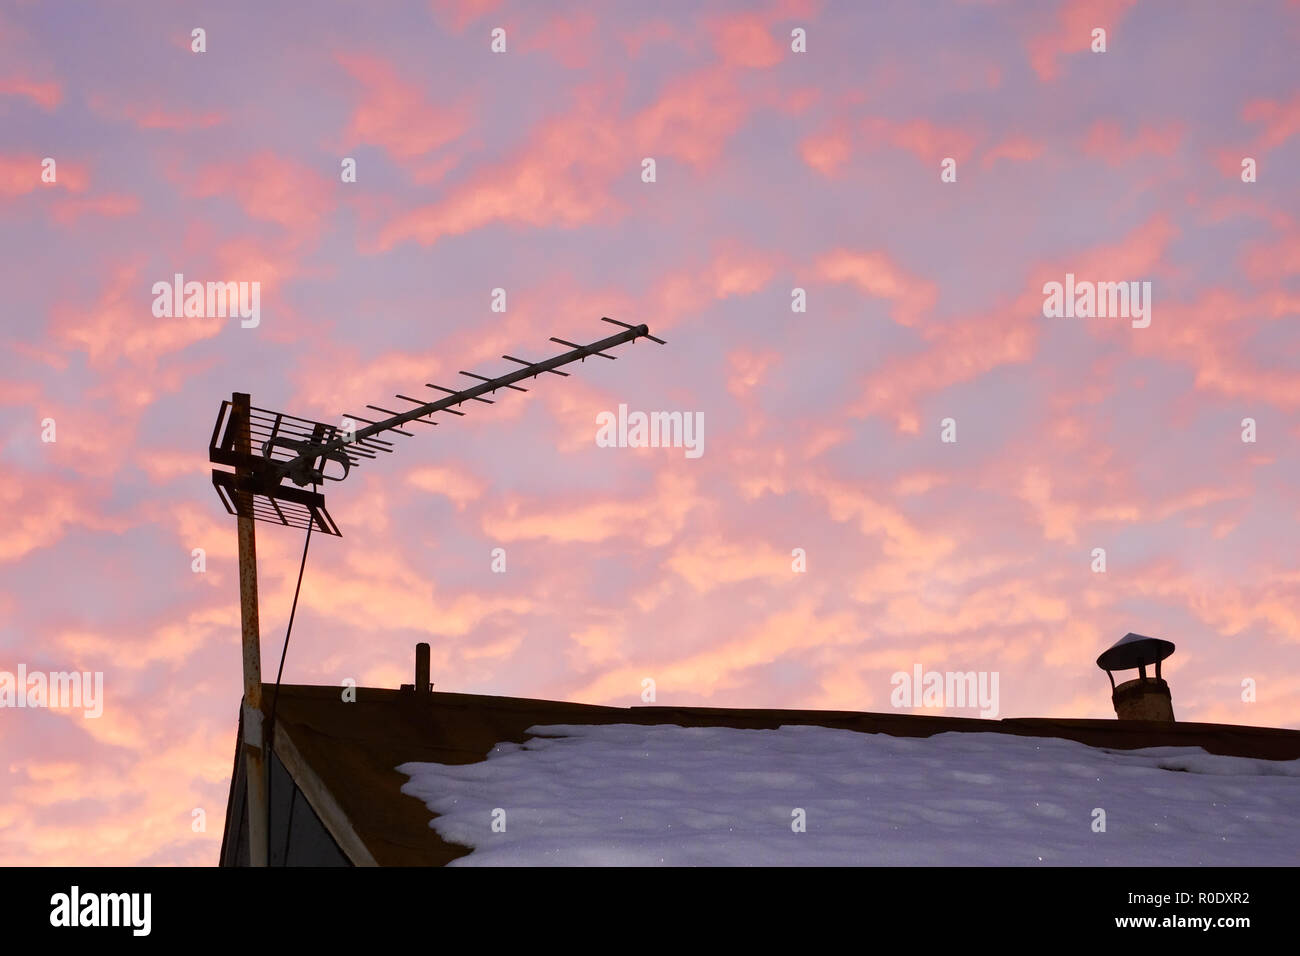 Television antenna over the snowy roof of the old house against reddish cloudy sky in evening time Stock Photo